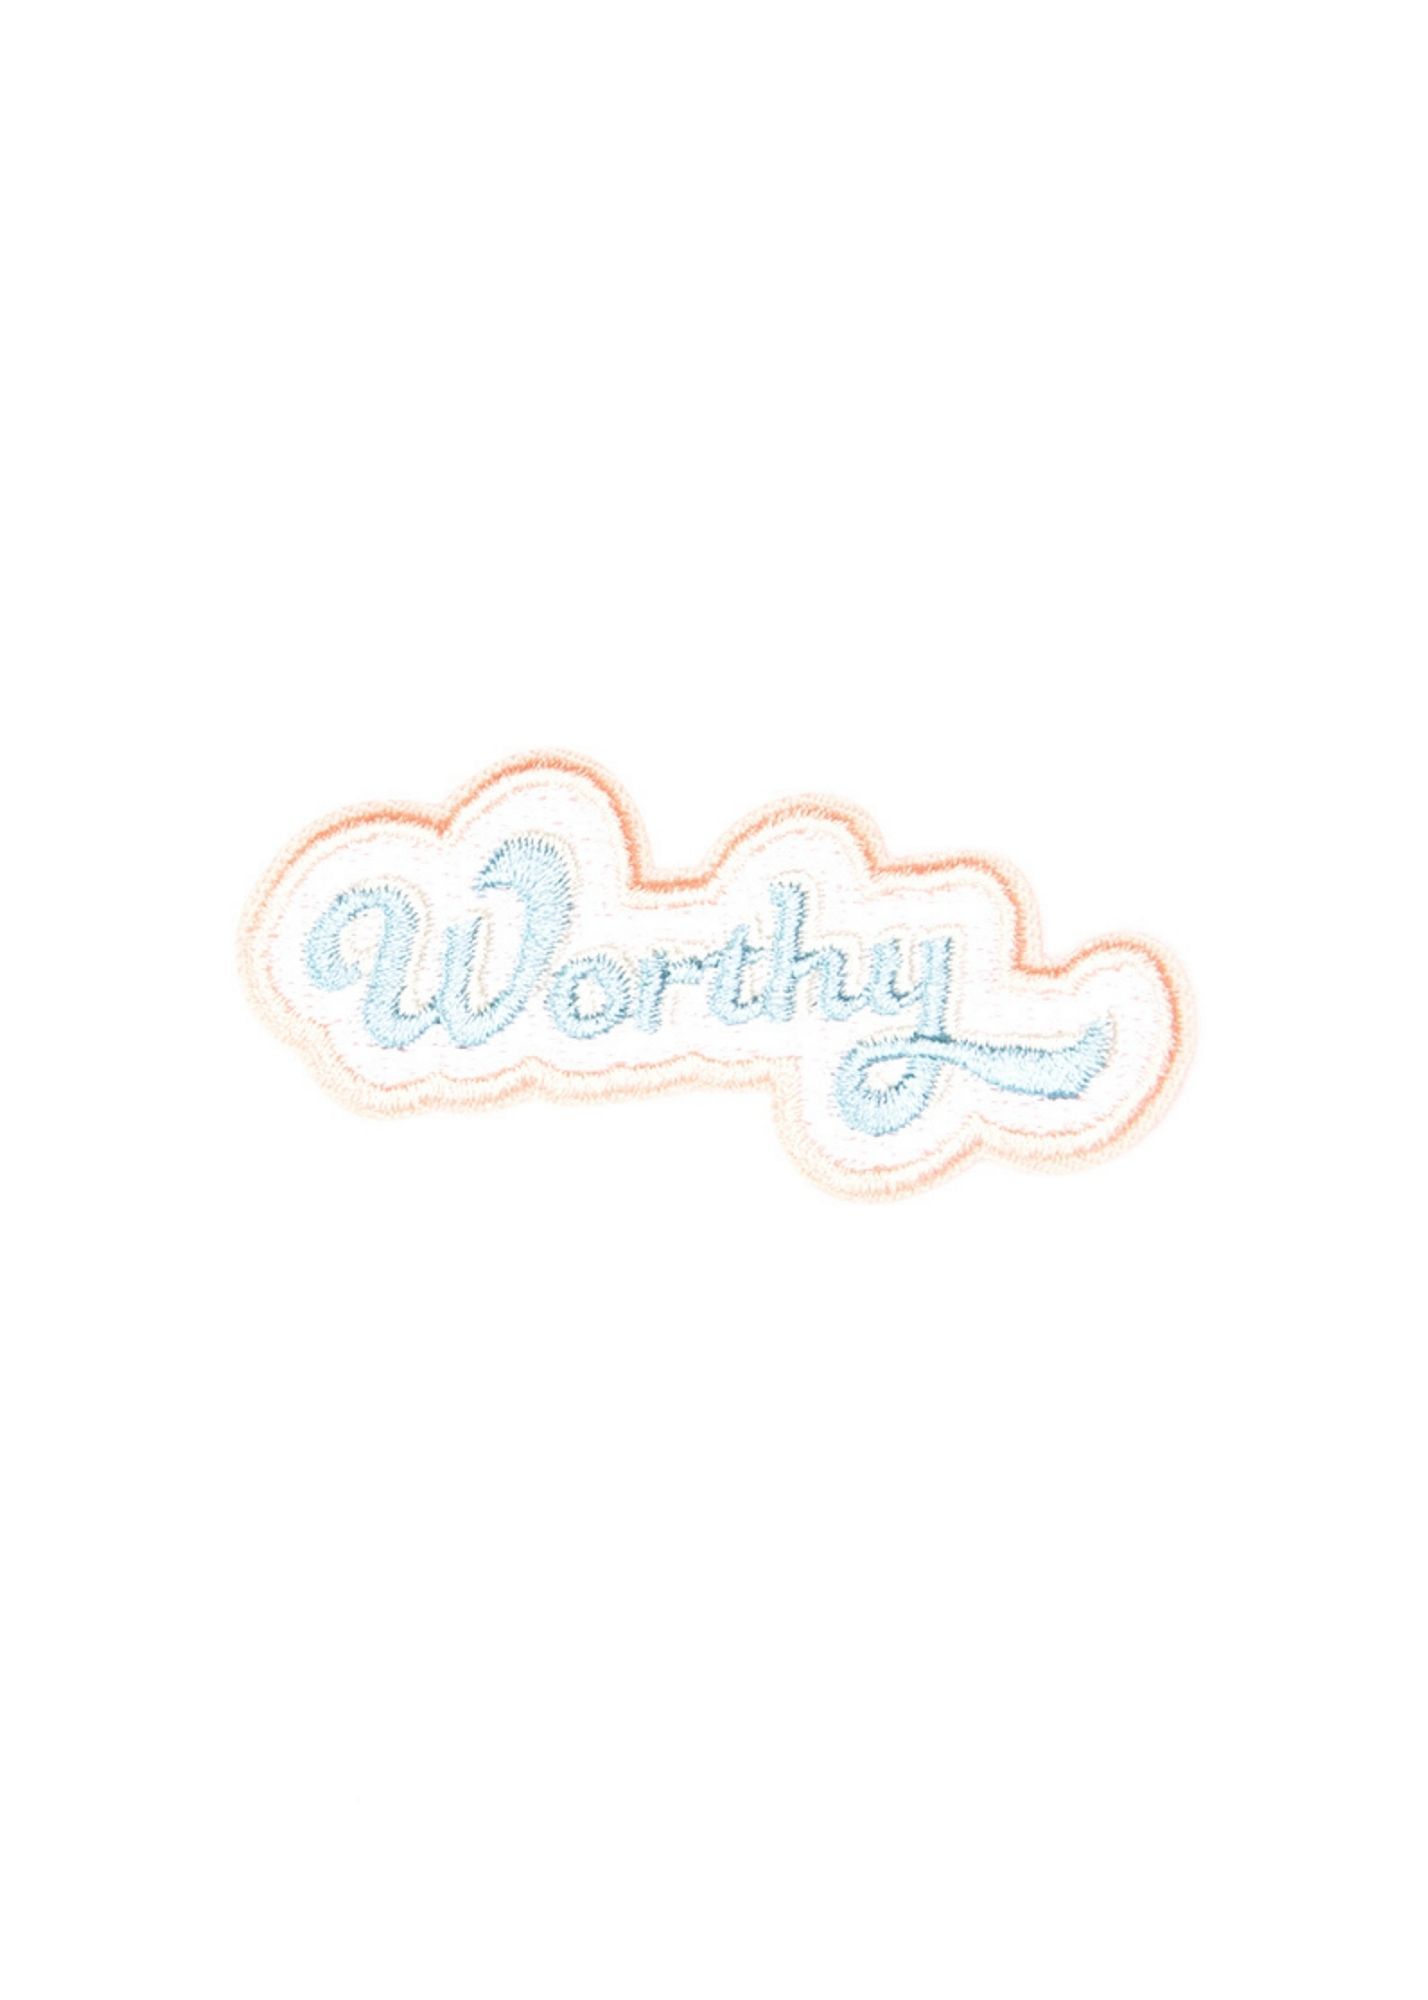 Encouraging Iron-on Patch Home & Lifestyle Inherit Co. Worthy